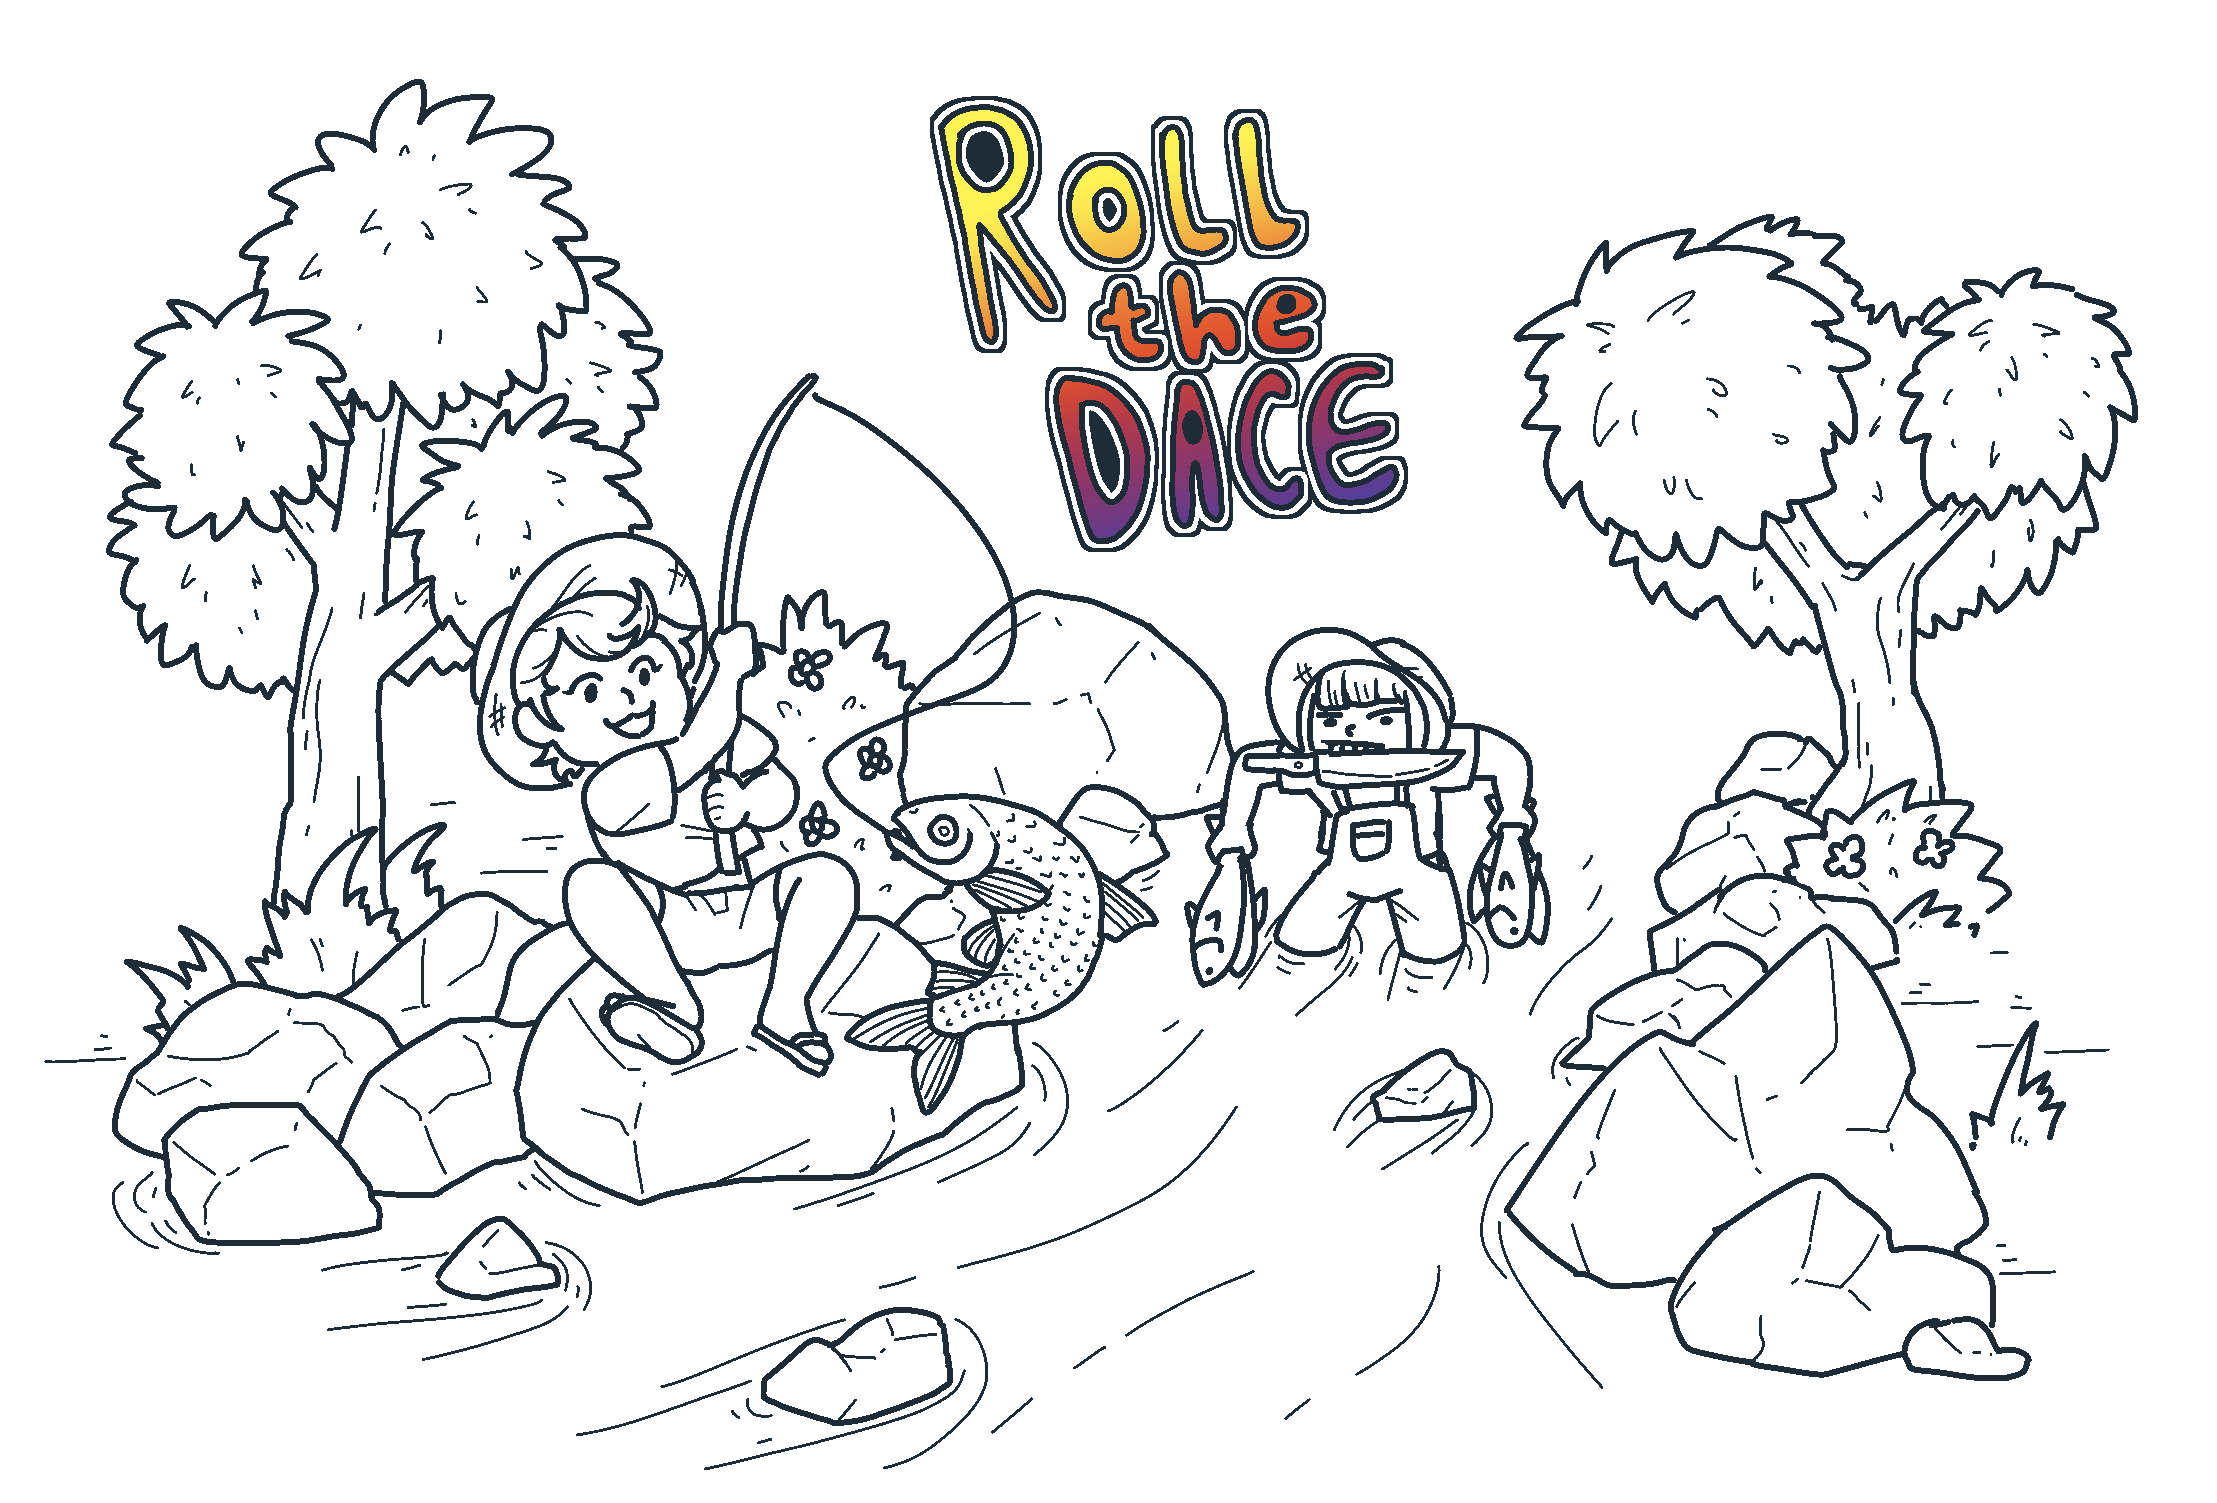 ROLL the DACE